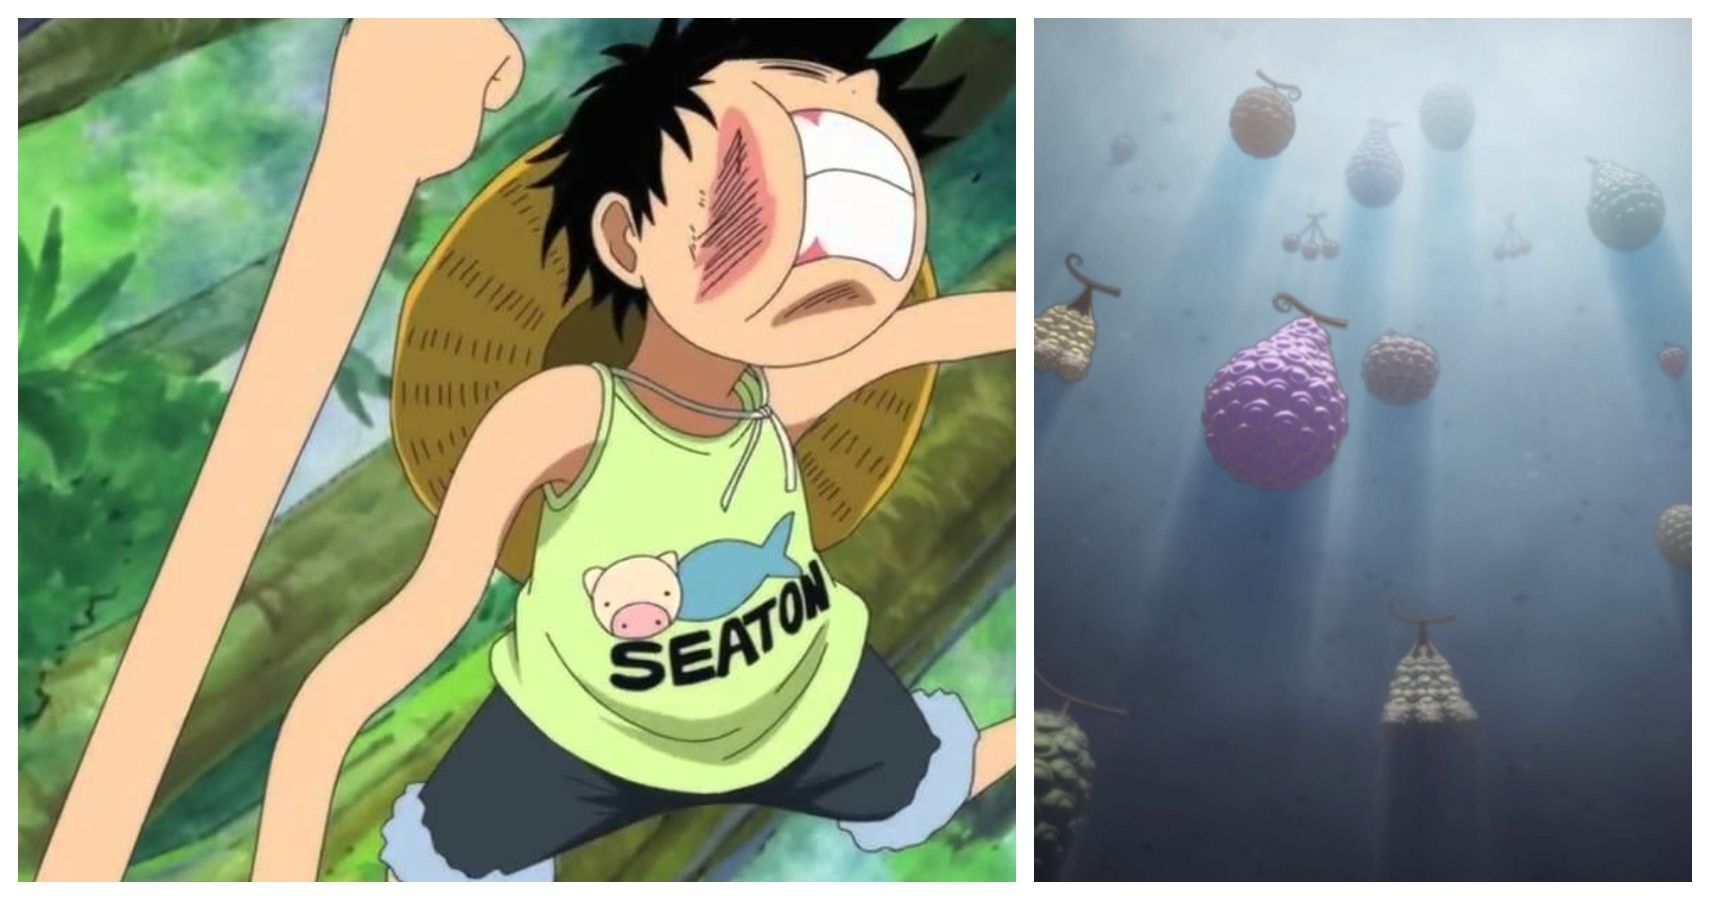 What if Luffy ate the Magu Magu fruit instead of the Gomu Gomu? - Quora